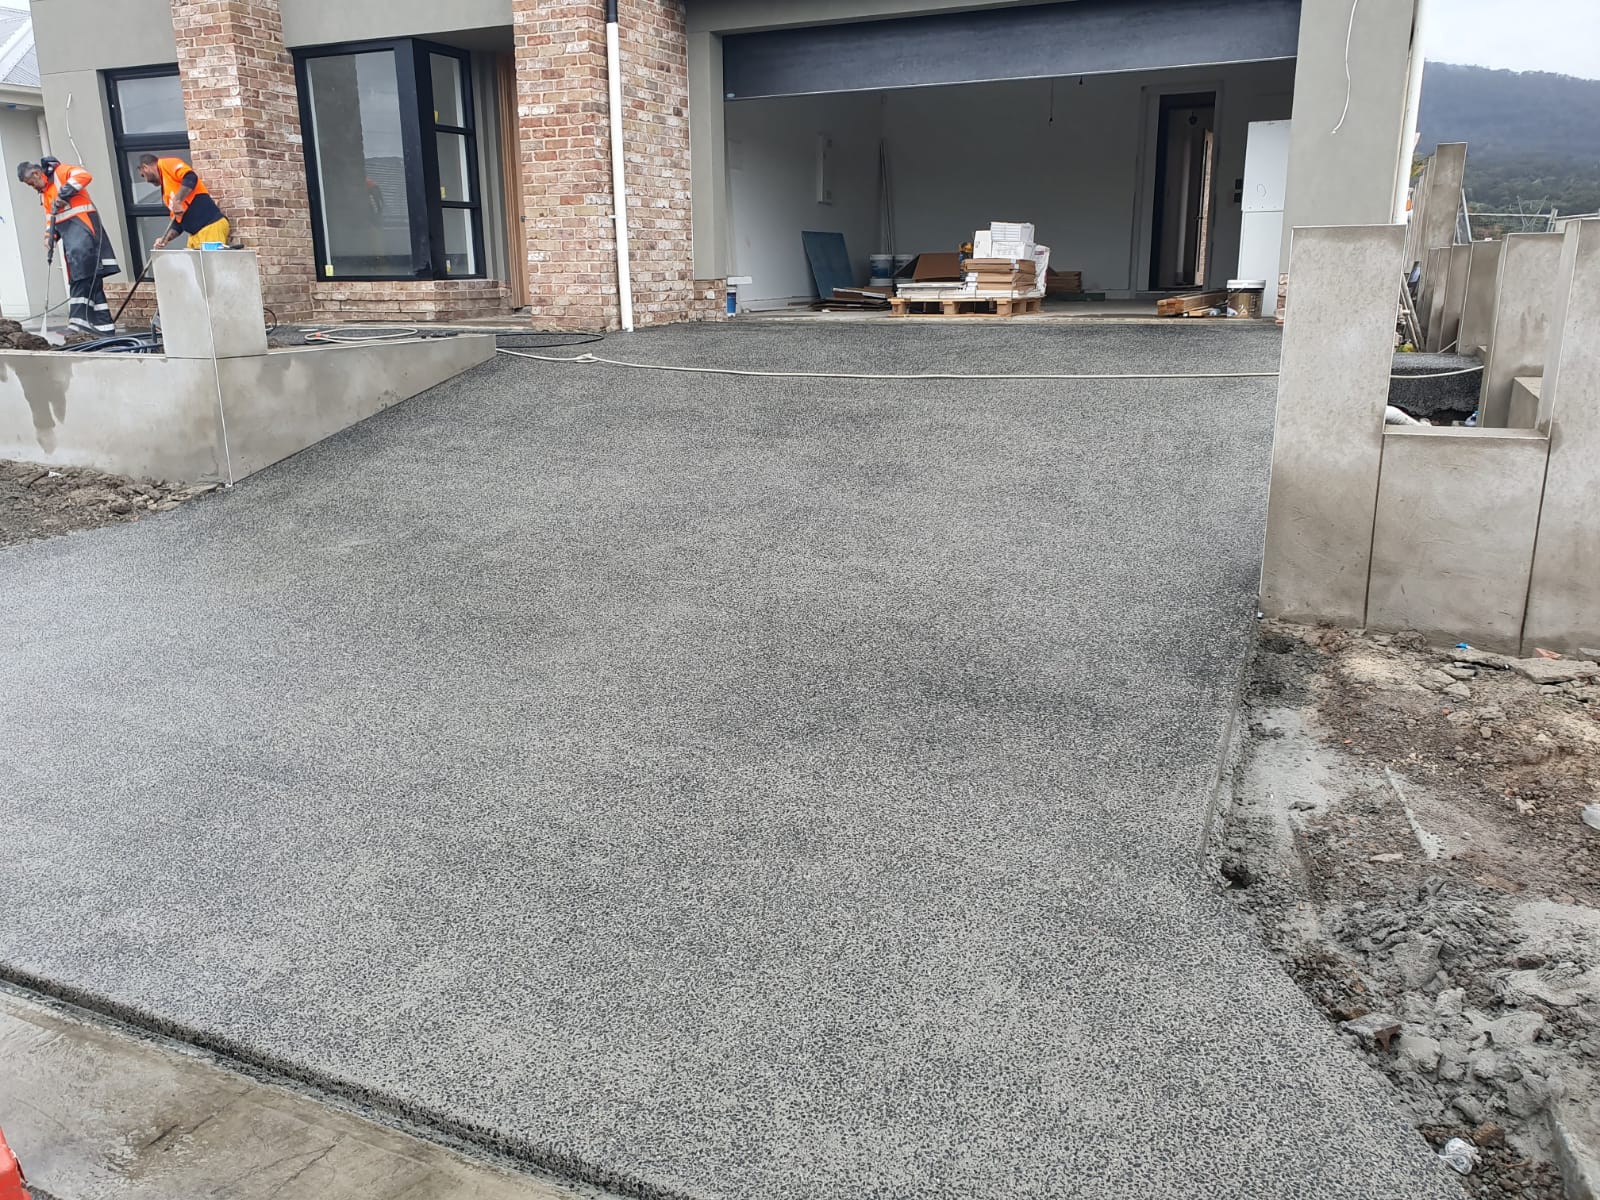 Example of exposed aggregate concreted driveway